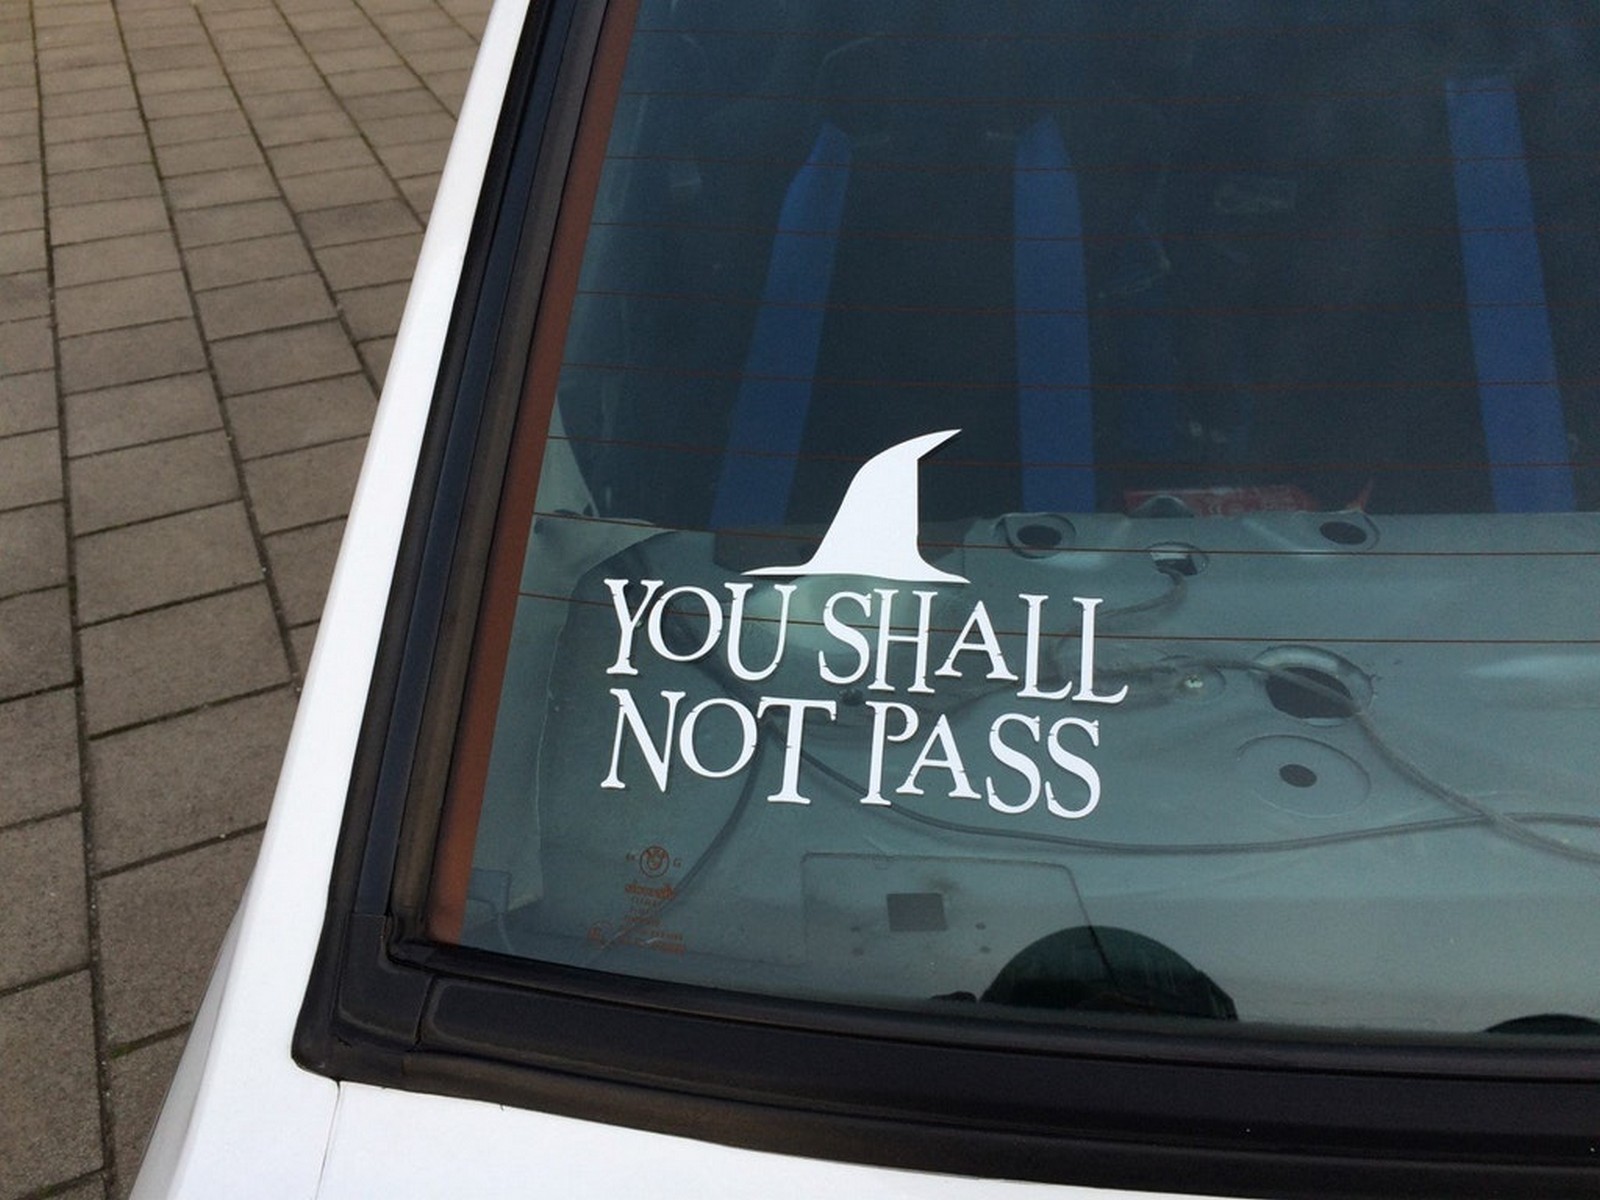 27 Funny Bumper Stickers - This favorite LOTR quote just begs to be on funny bumper stickers.